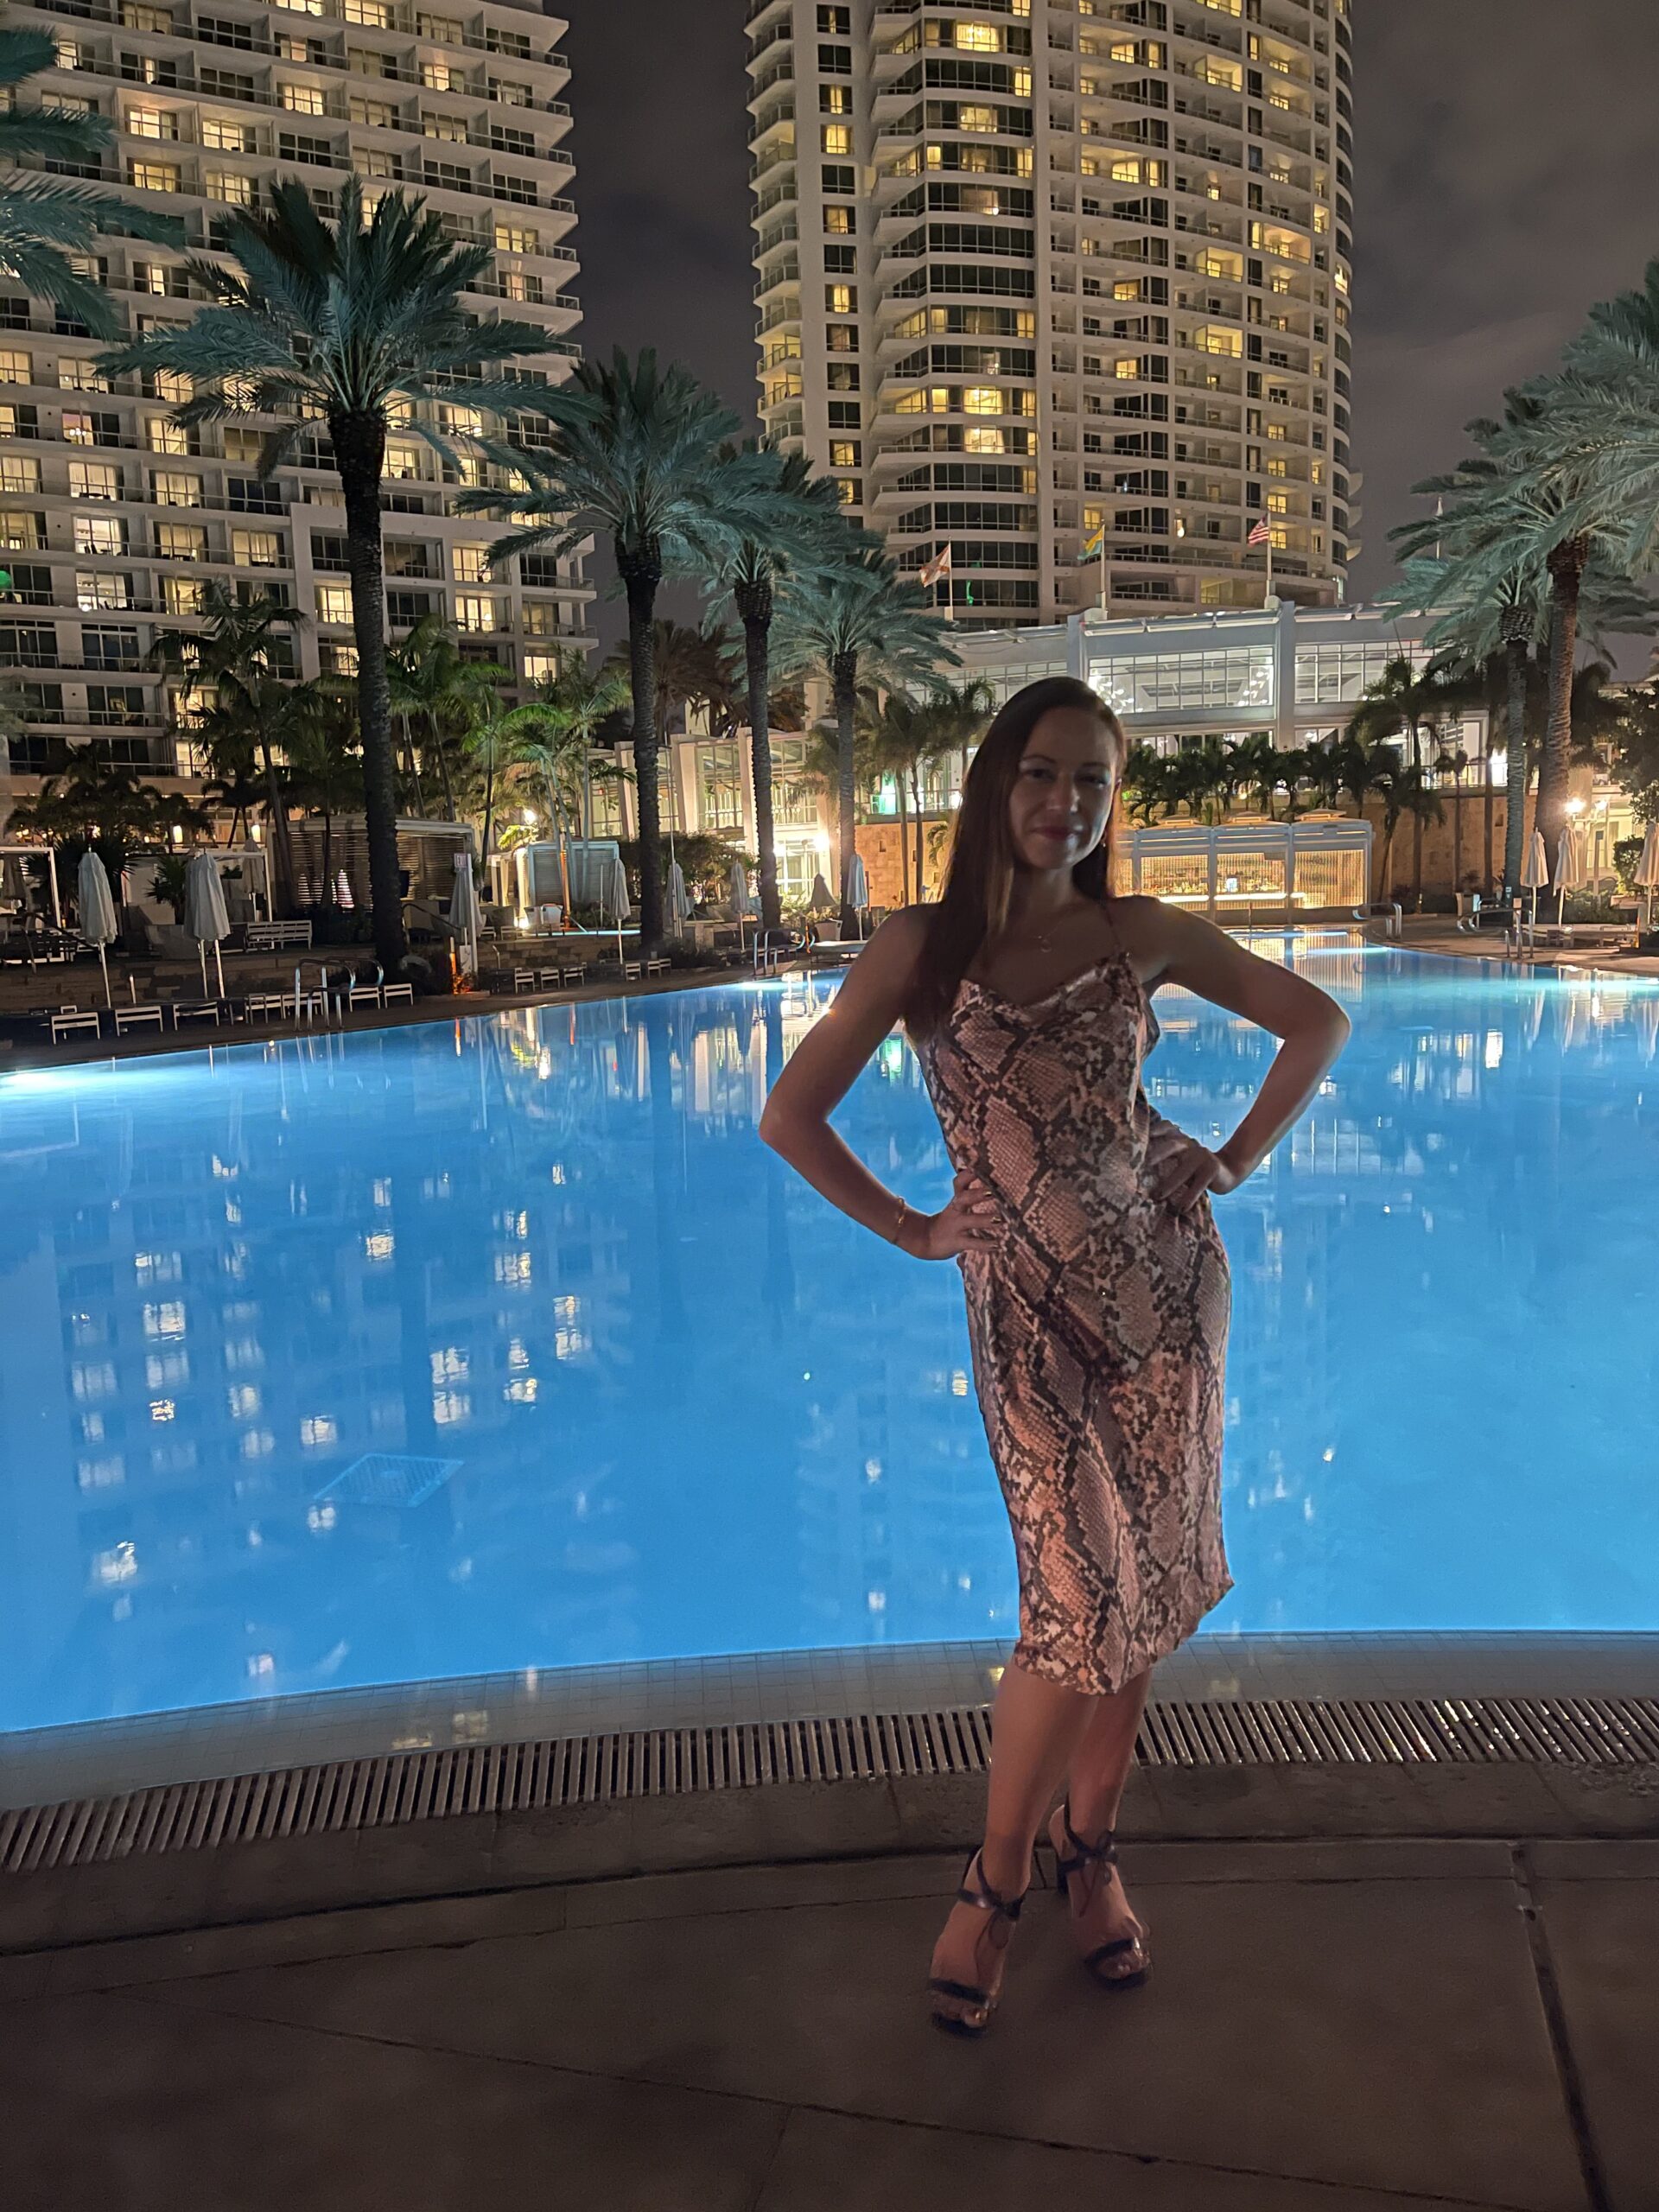 by-the-pool-at-night